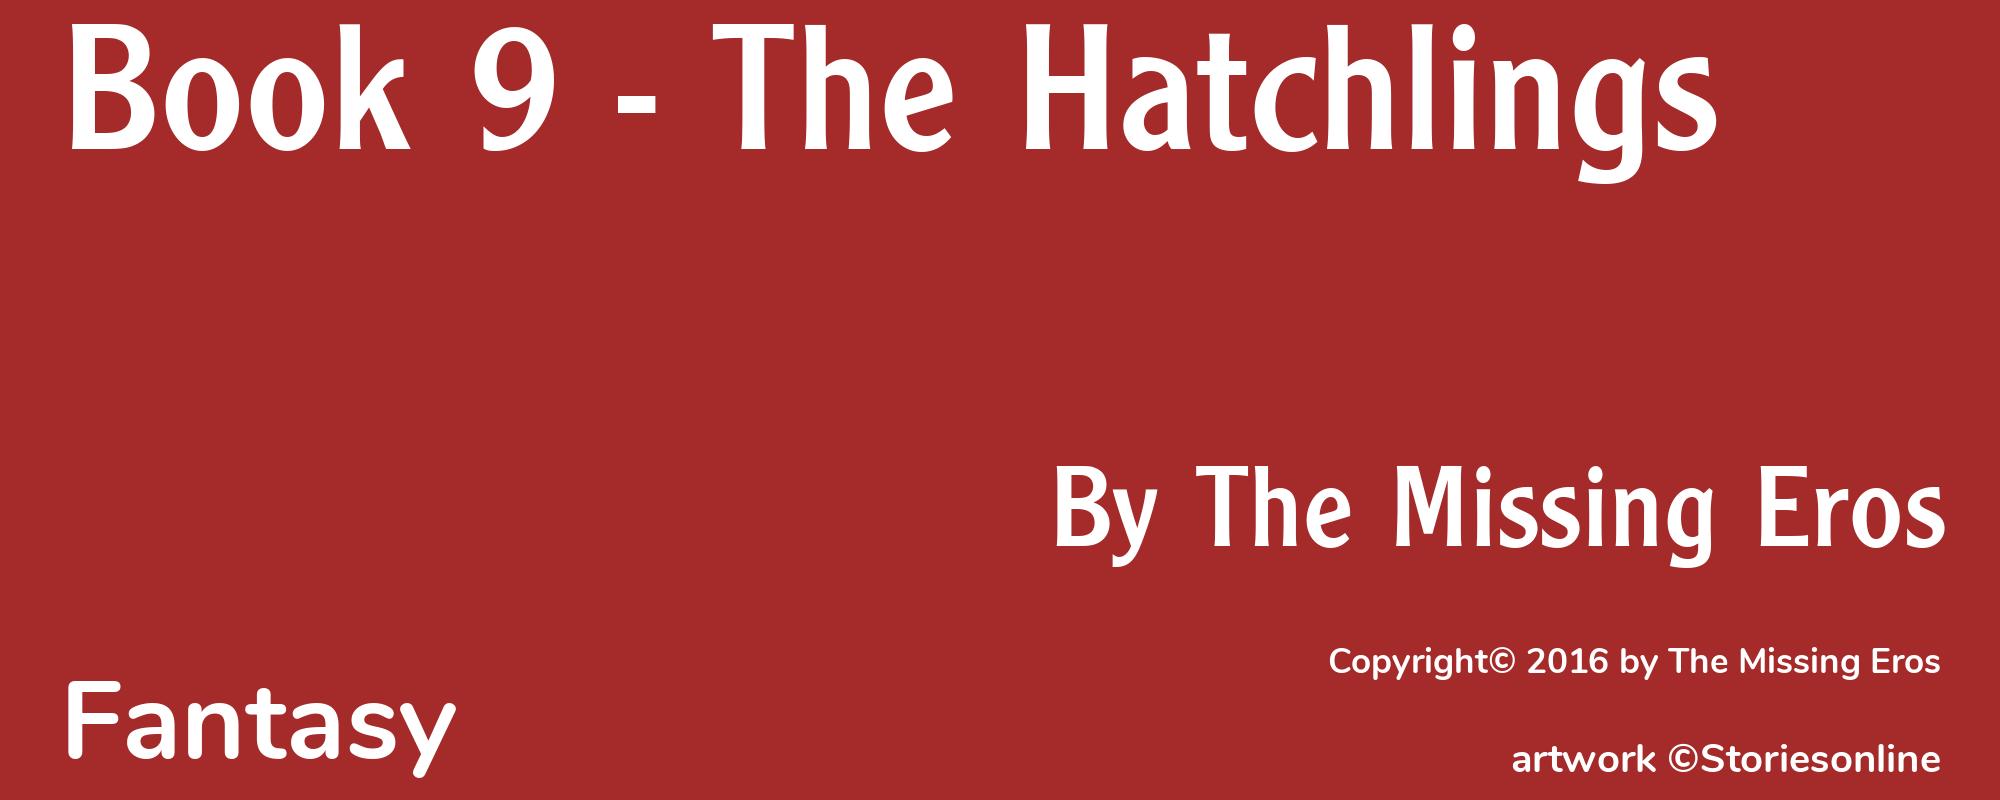 Book 9 - The Hatchlings - Cover